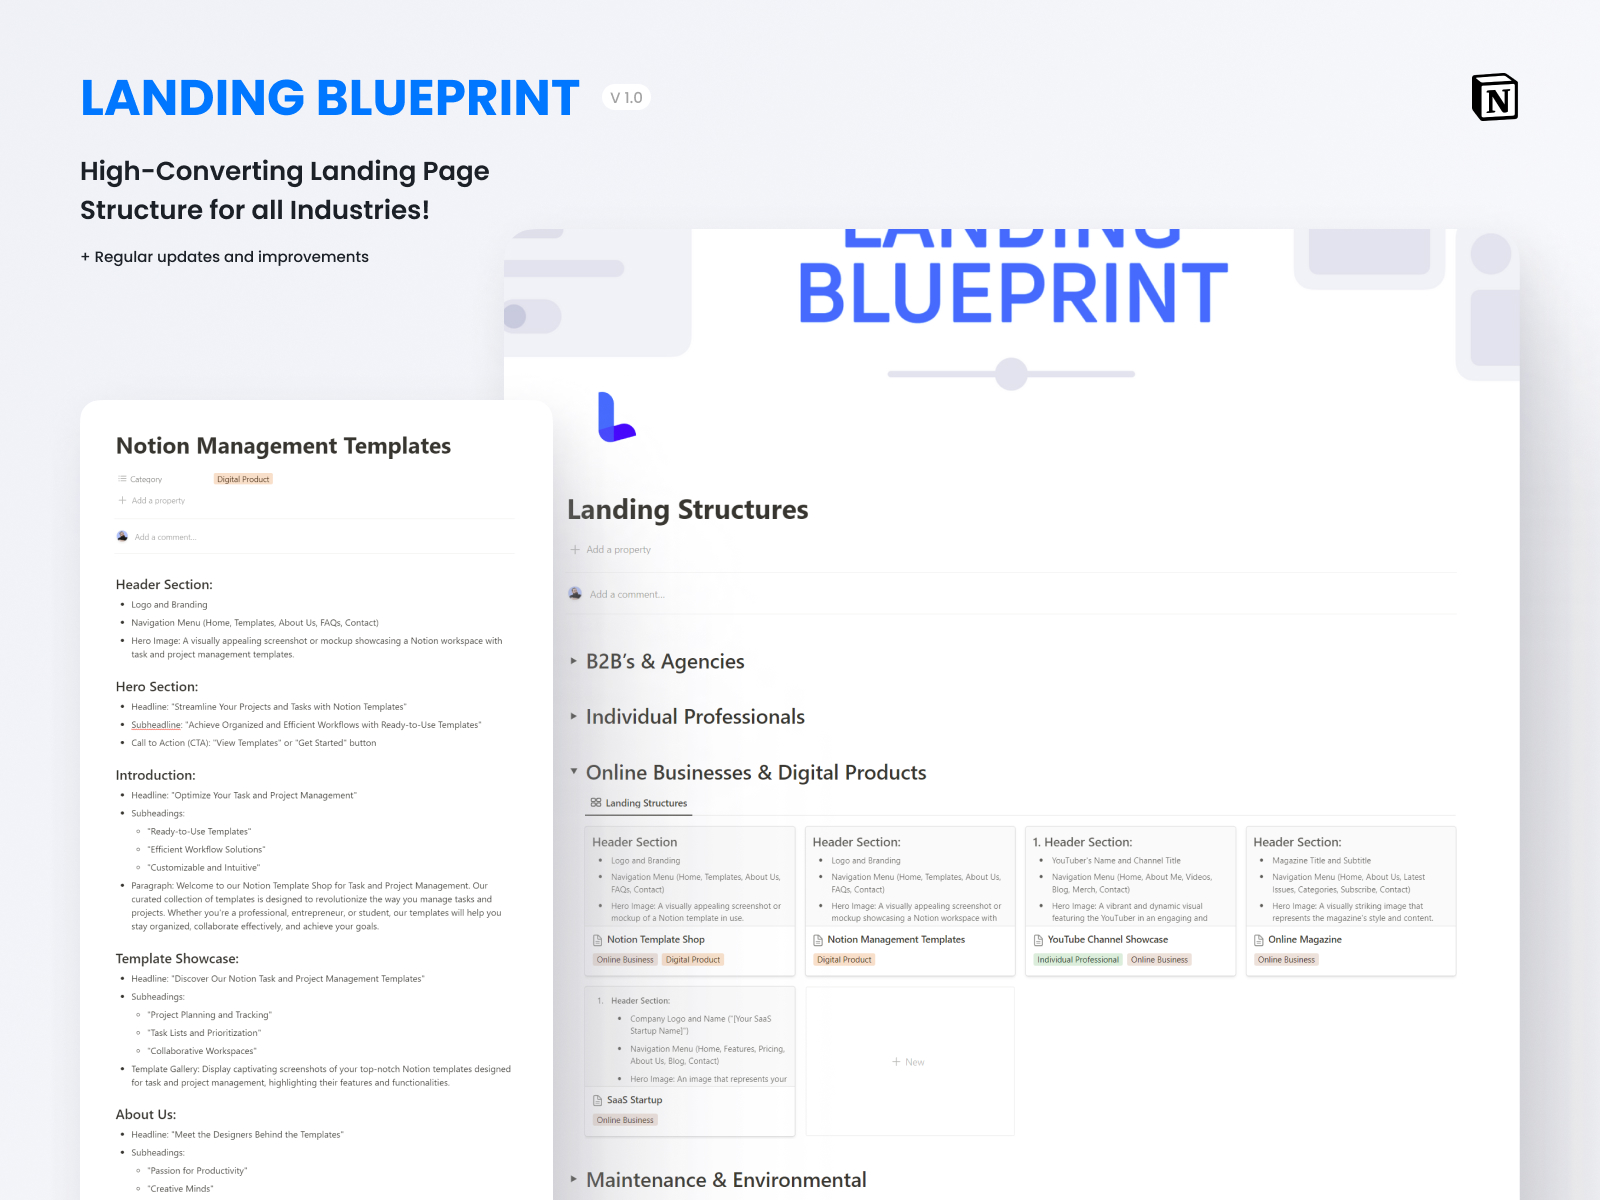 Landing Blueprint - High-Converting Landing Page Structure for all Industries!